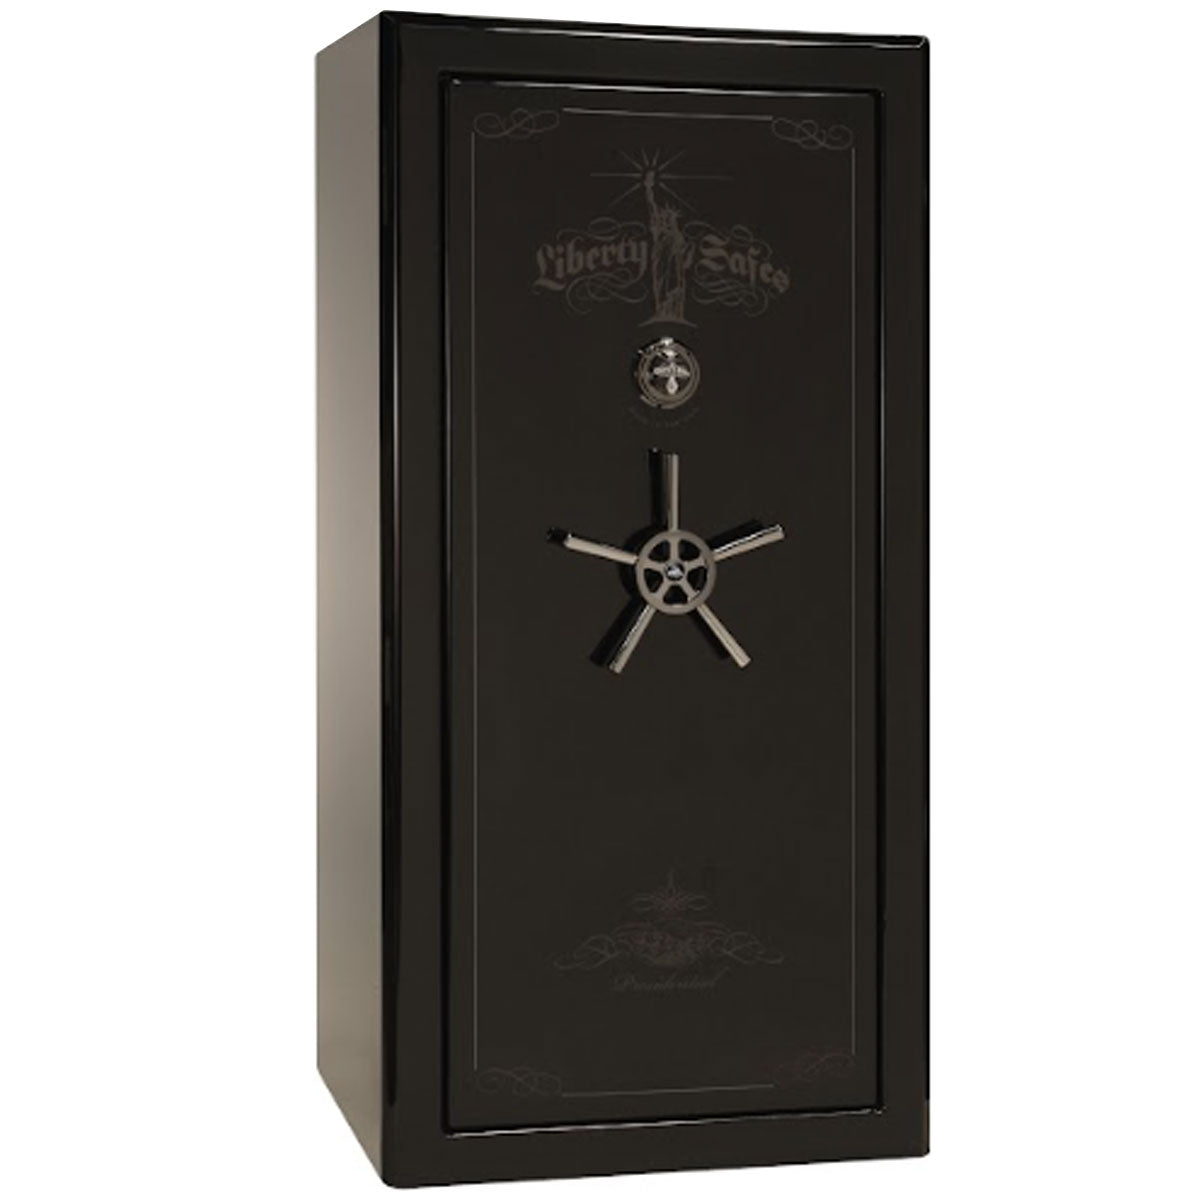 Liberty Safe Presidential 25 in Black Gloss with Black Chrome Electronic Lock, closed door.